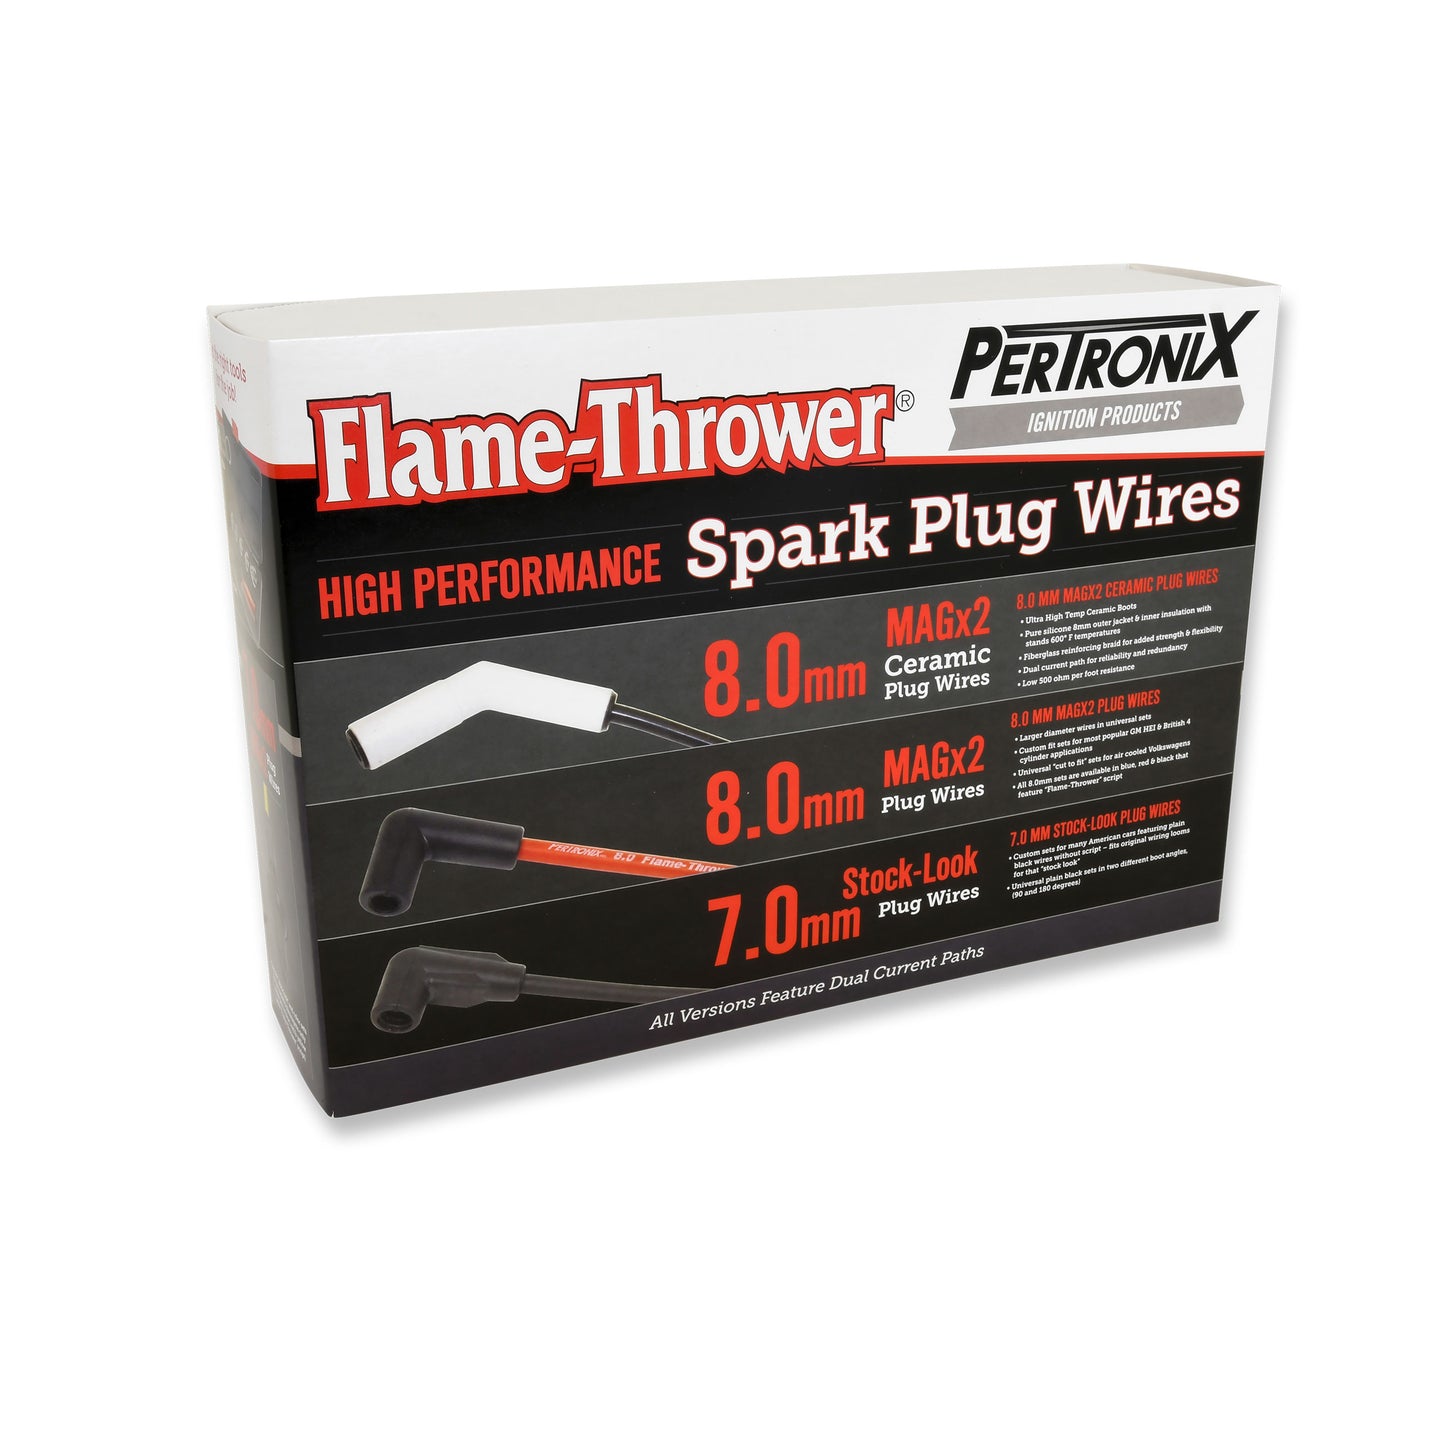 PerTronix 808204 Flame-Thrower Spark Plug Wires 8 cyl 8mm GM HEI Custom Fit Black